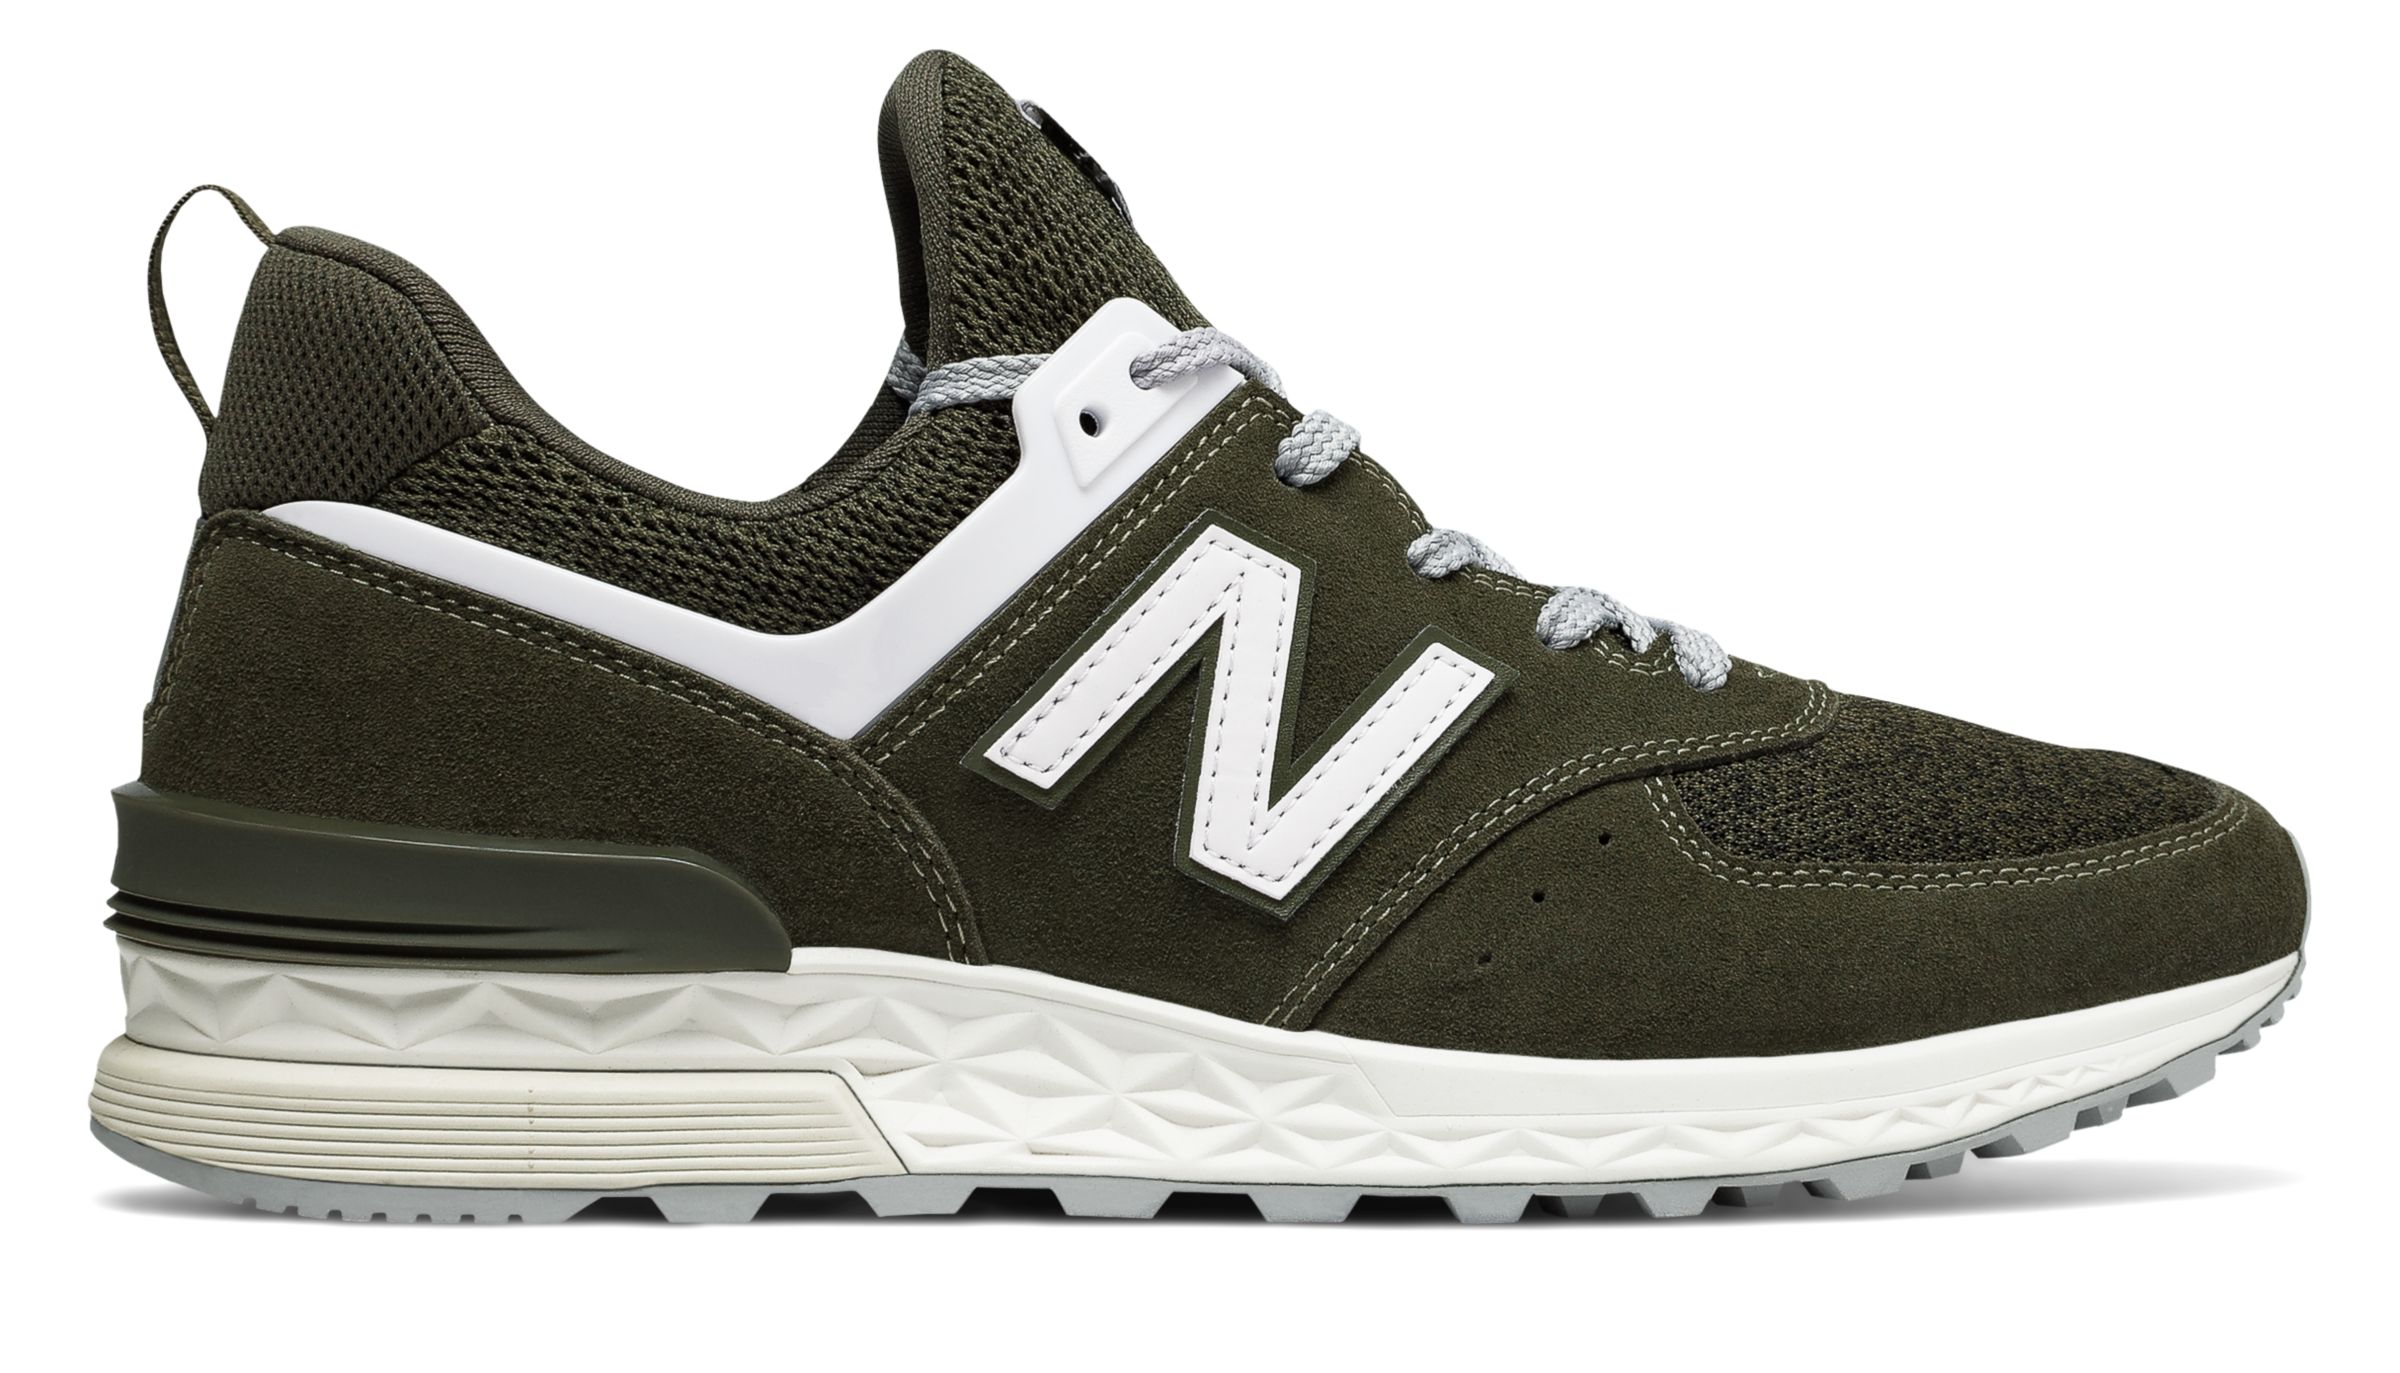 Classic Men’s Shoes & Fashion Sneakers - New Balance